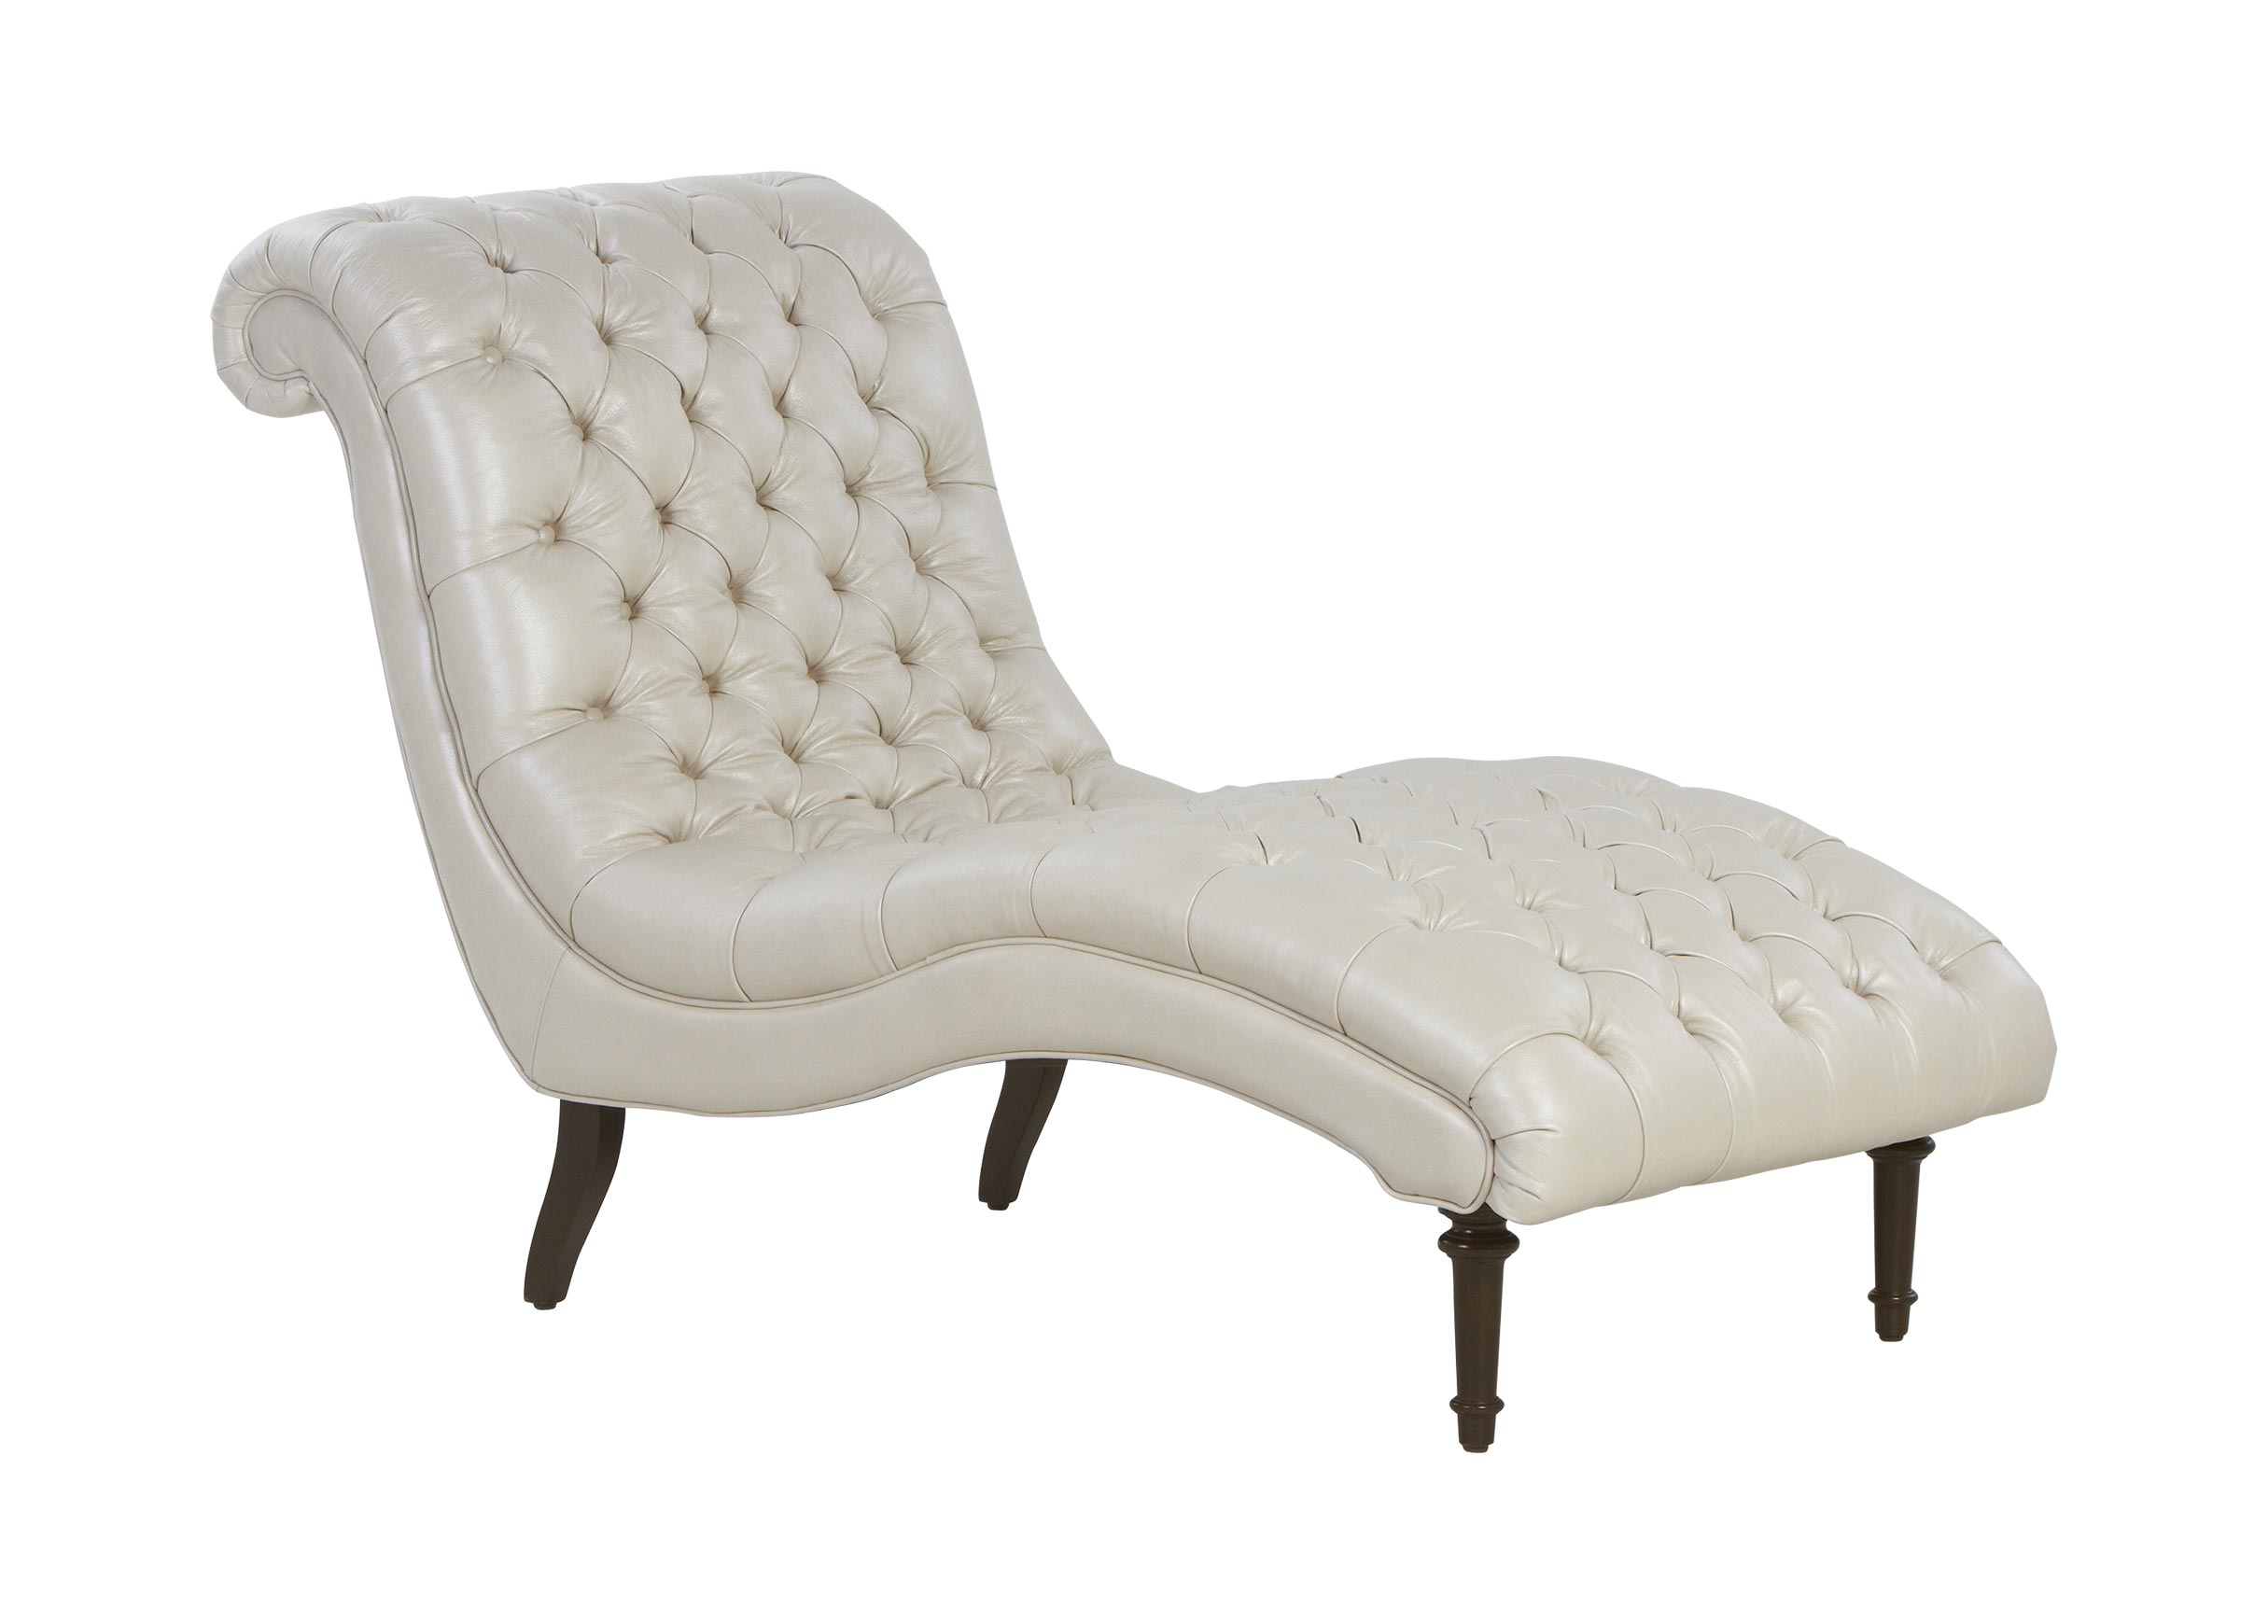 Harlowe Leather Chaise Chairs, White Leather Chaise